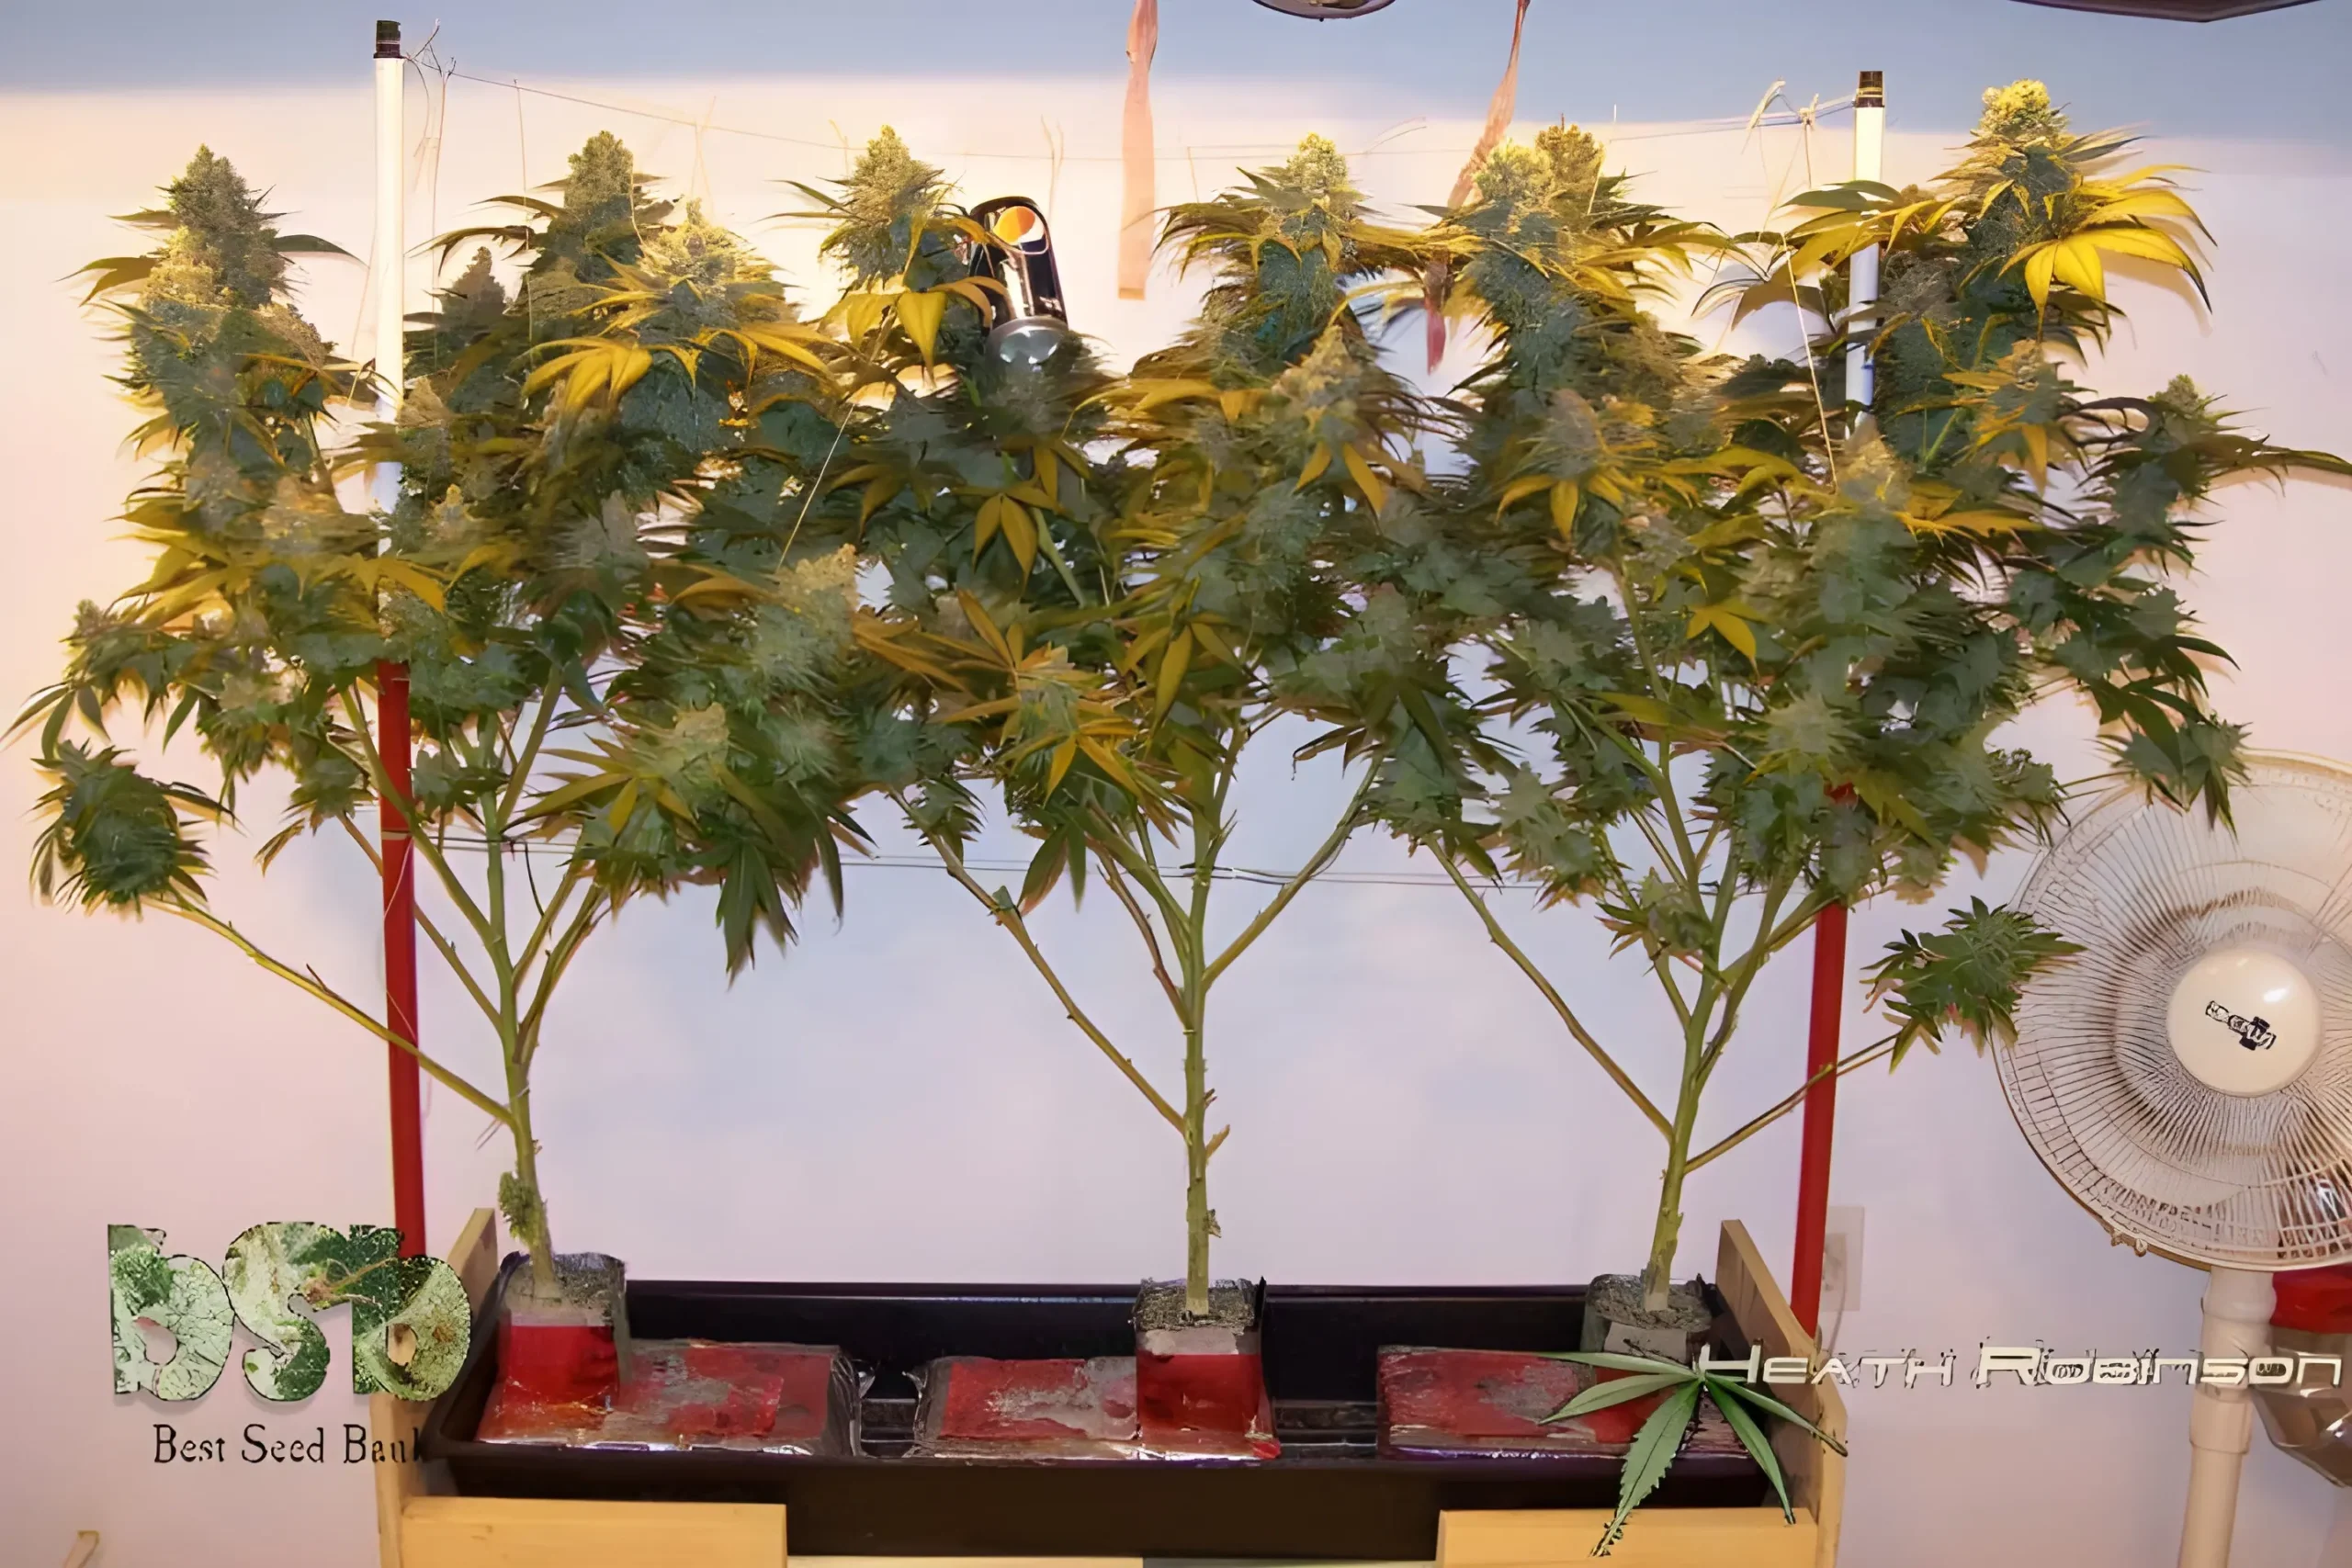 Hydroponic cannabis plants with large colas in an indoor setup.